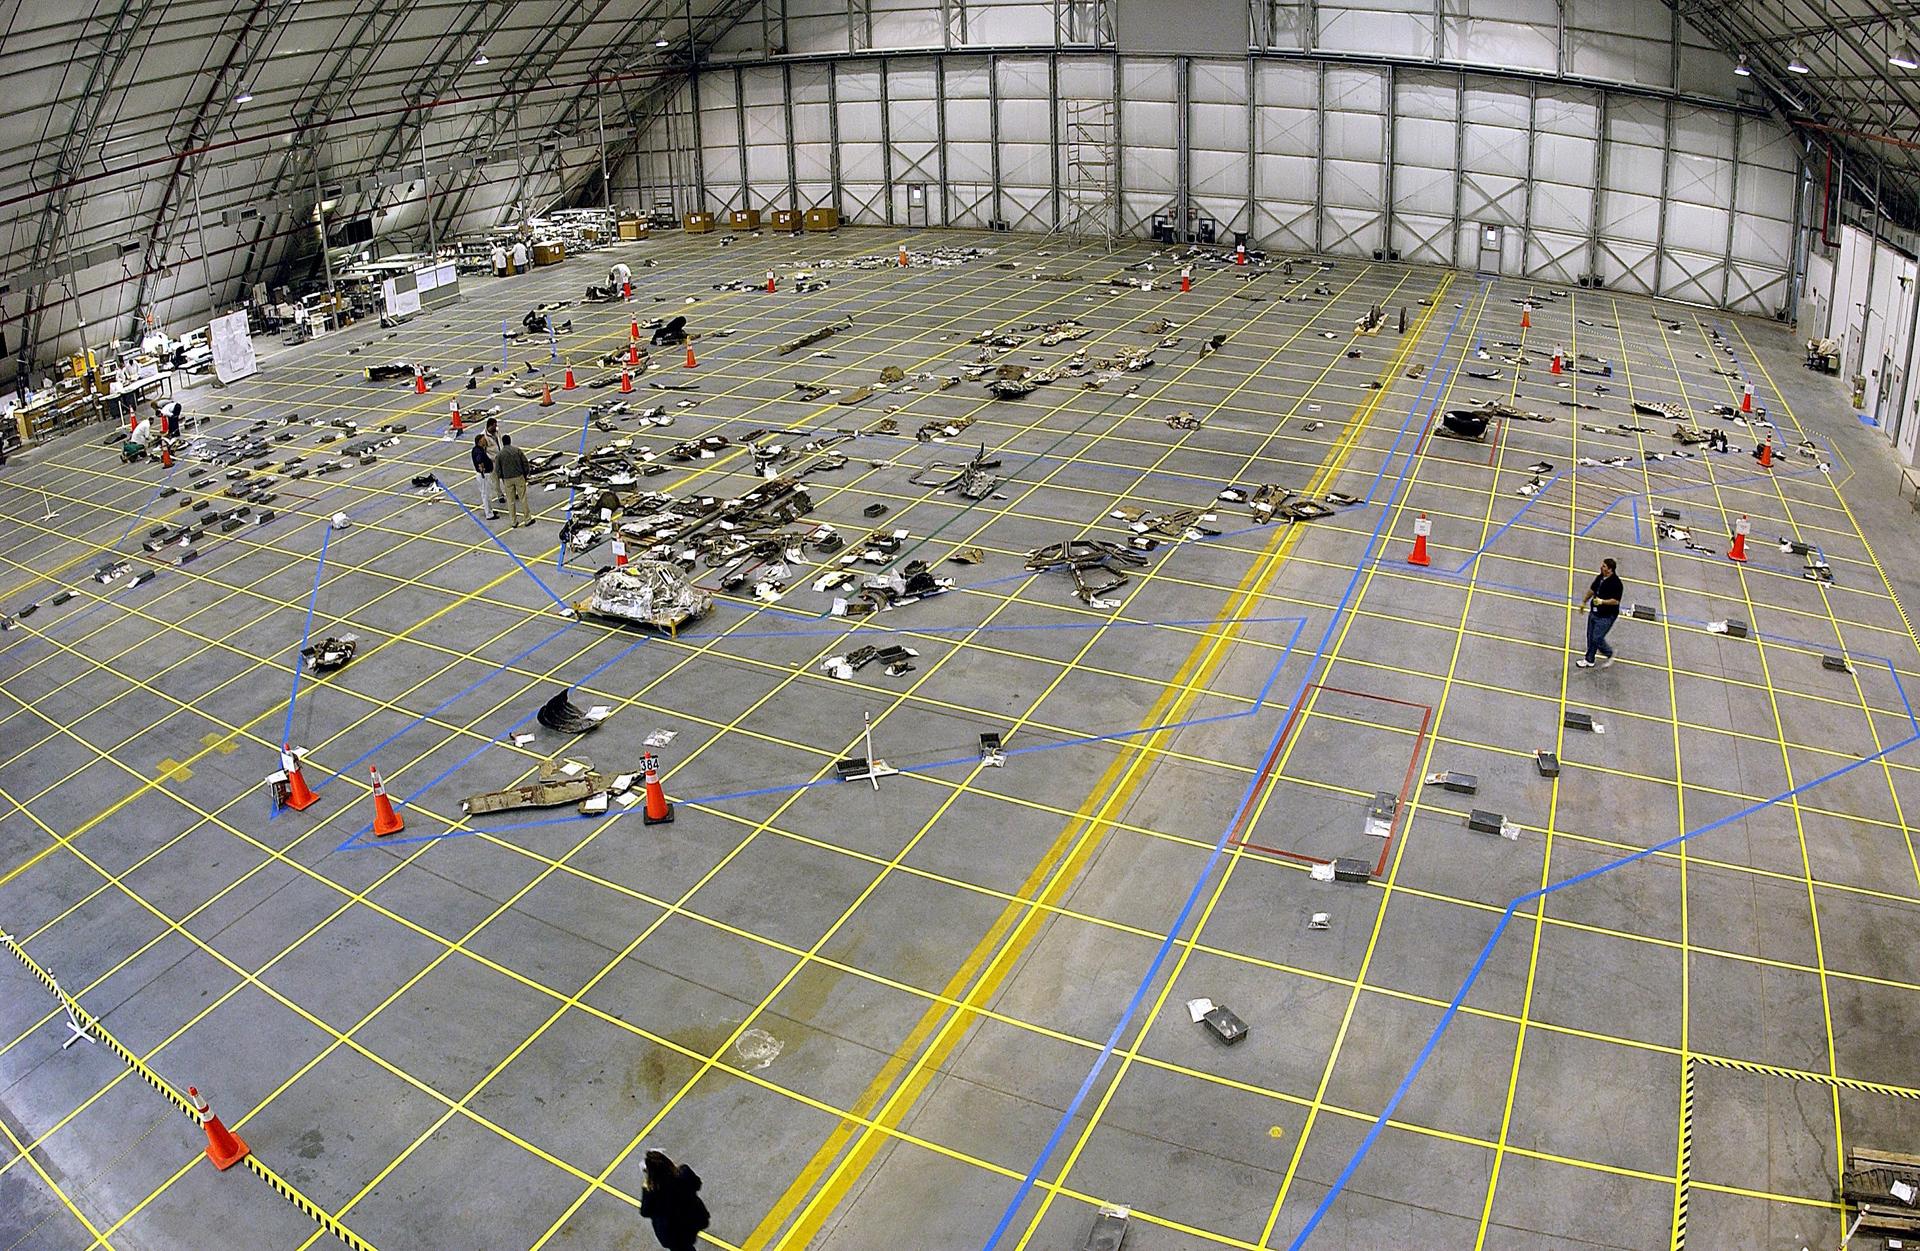 Columbia debris collected inside the RLV hangar